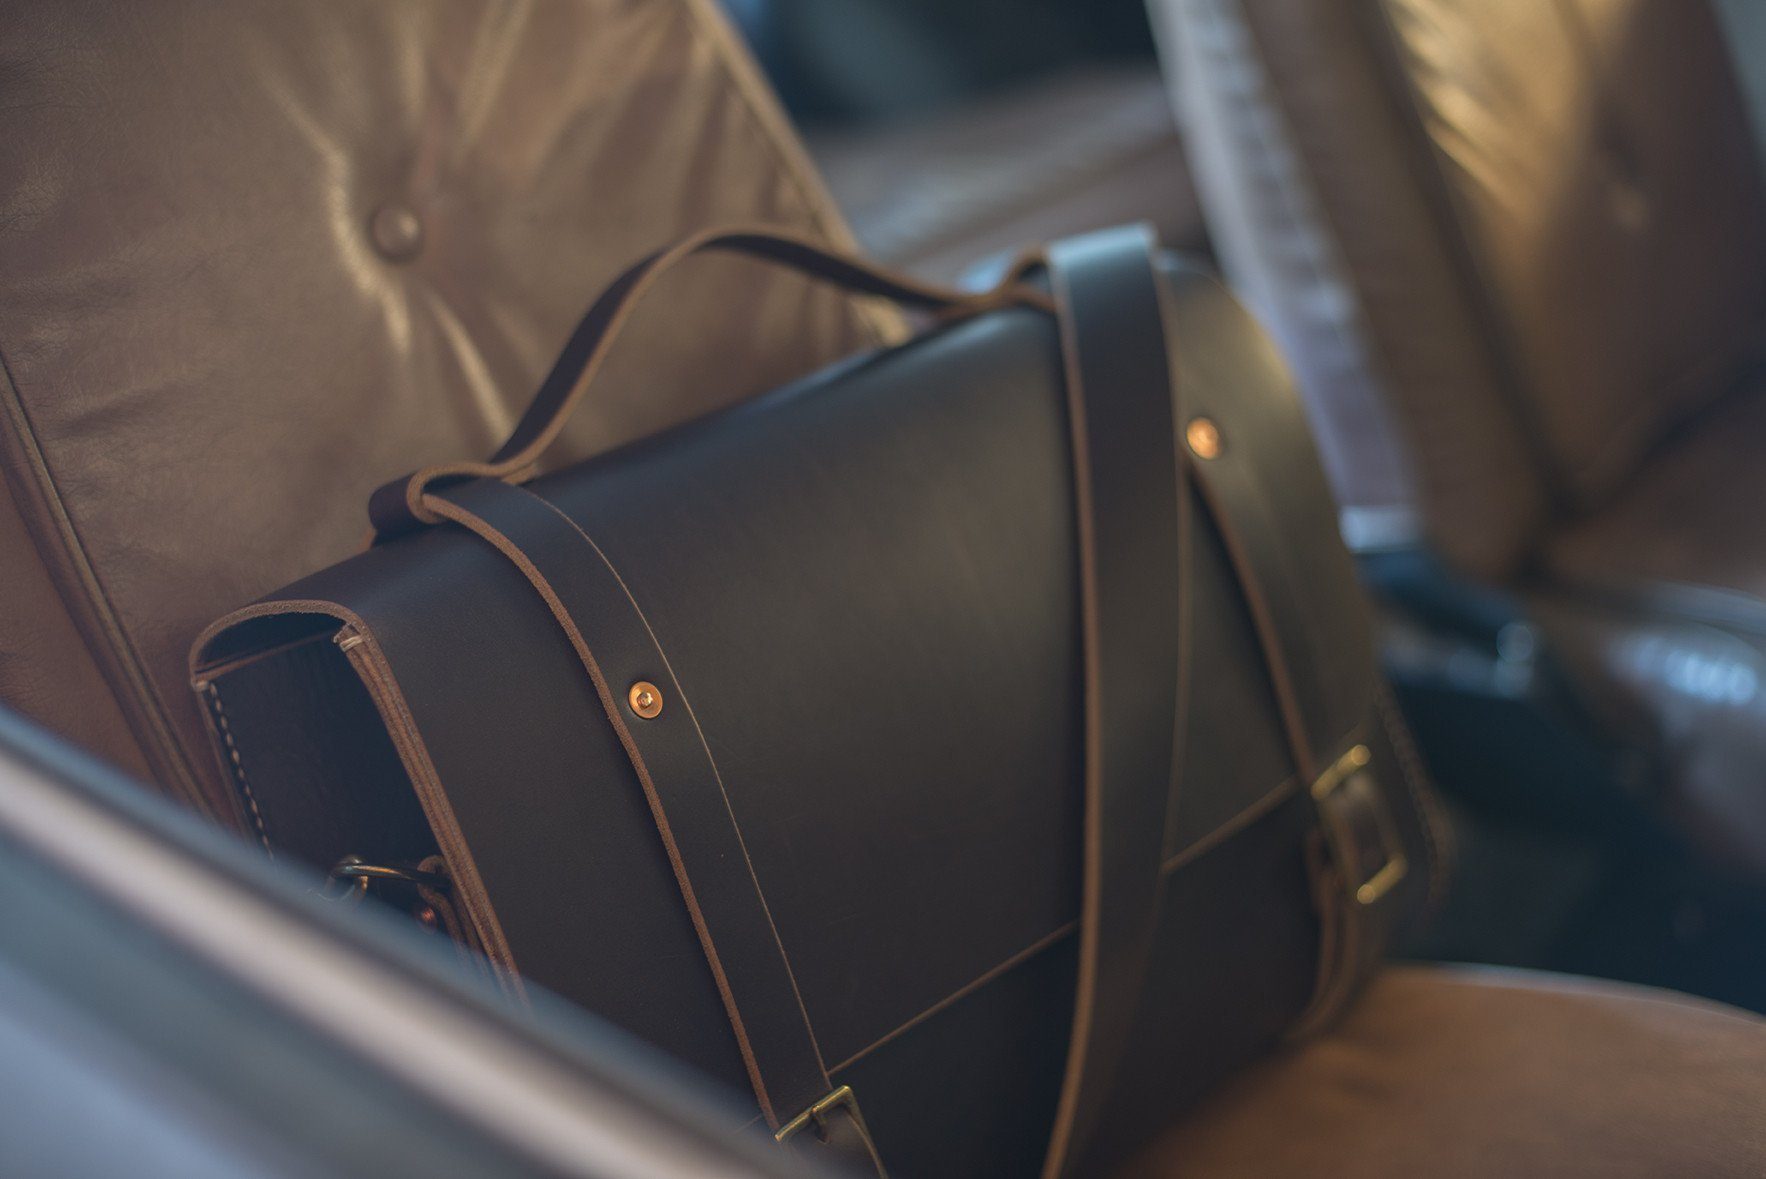 Handmade leather briefcase and leather laptop bag - Cooper Satchel - Go  Forth Goods ®